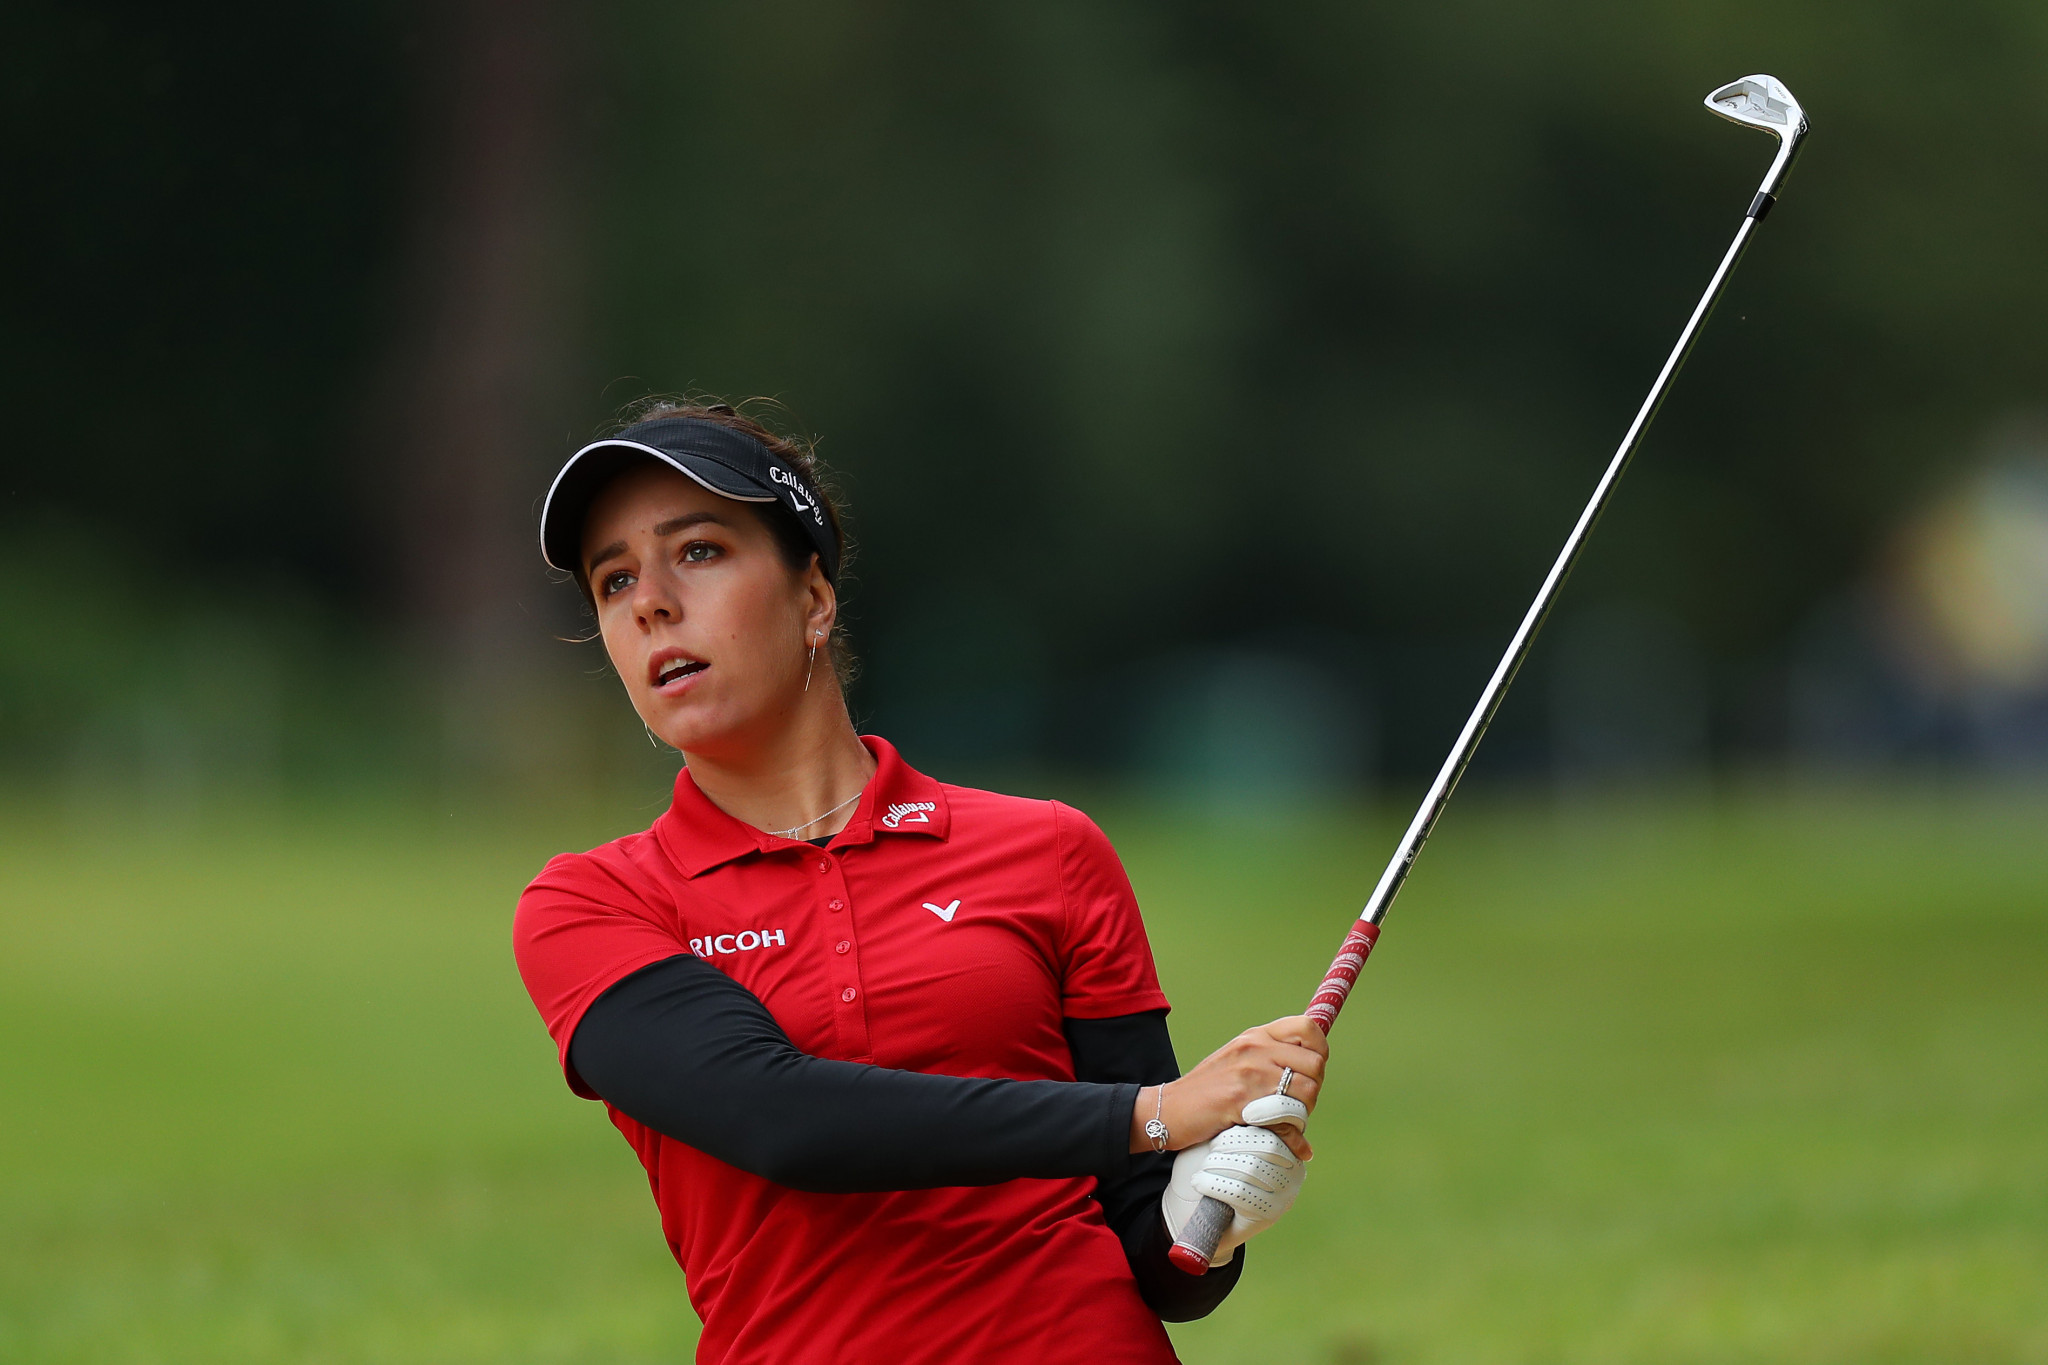 Hall out to defend title at Women's British Open and win back trophy stolen from her car